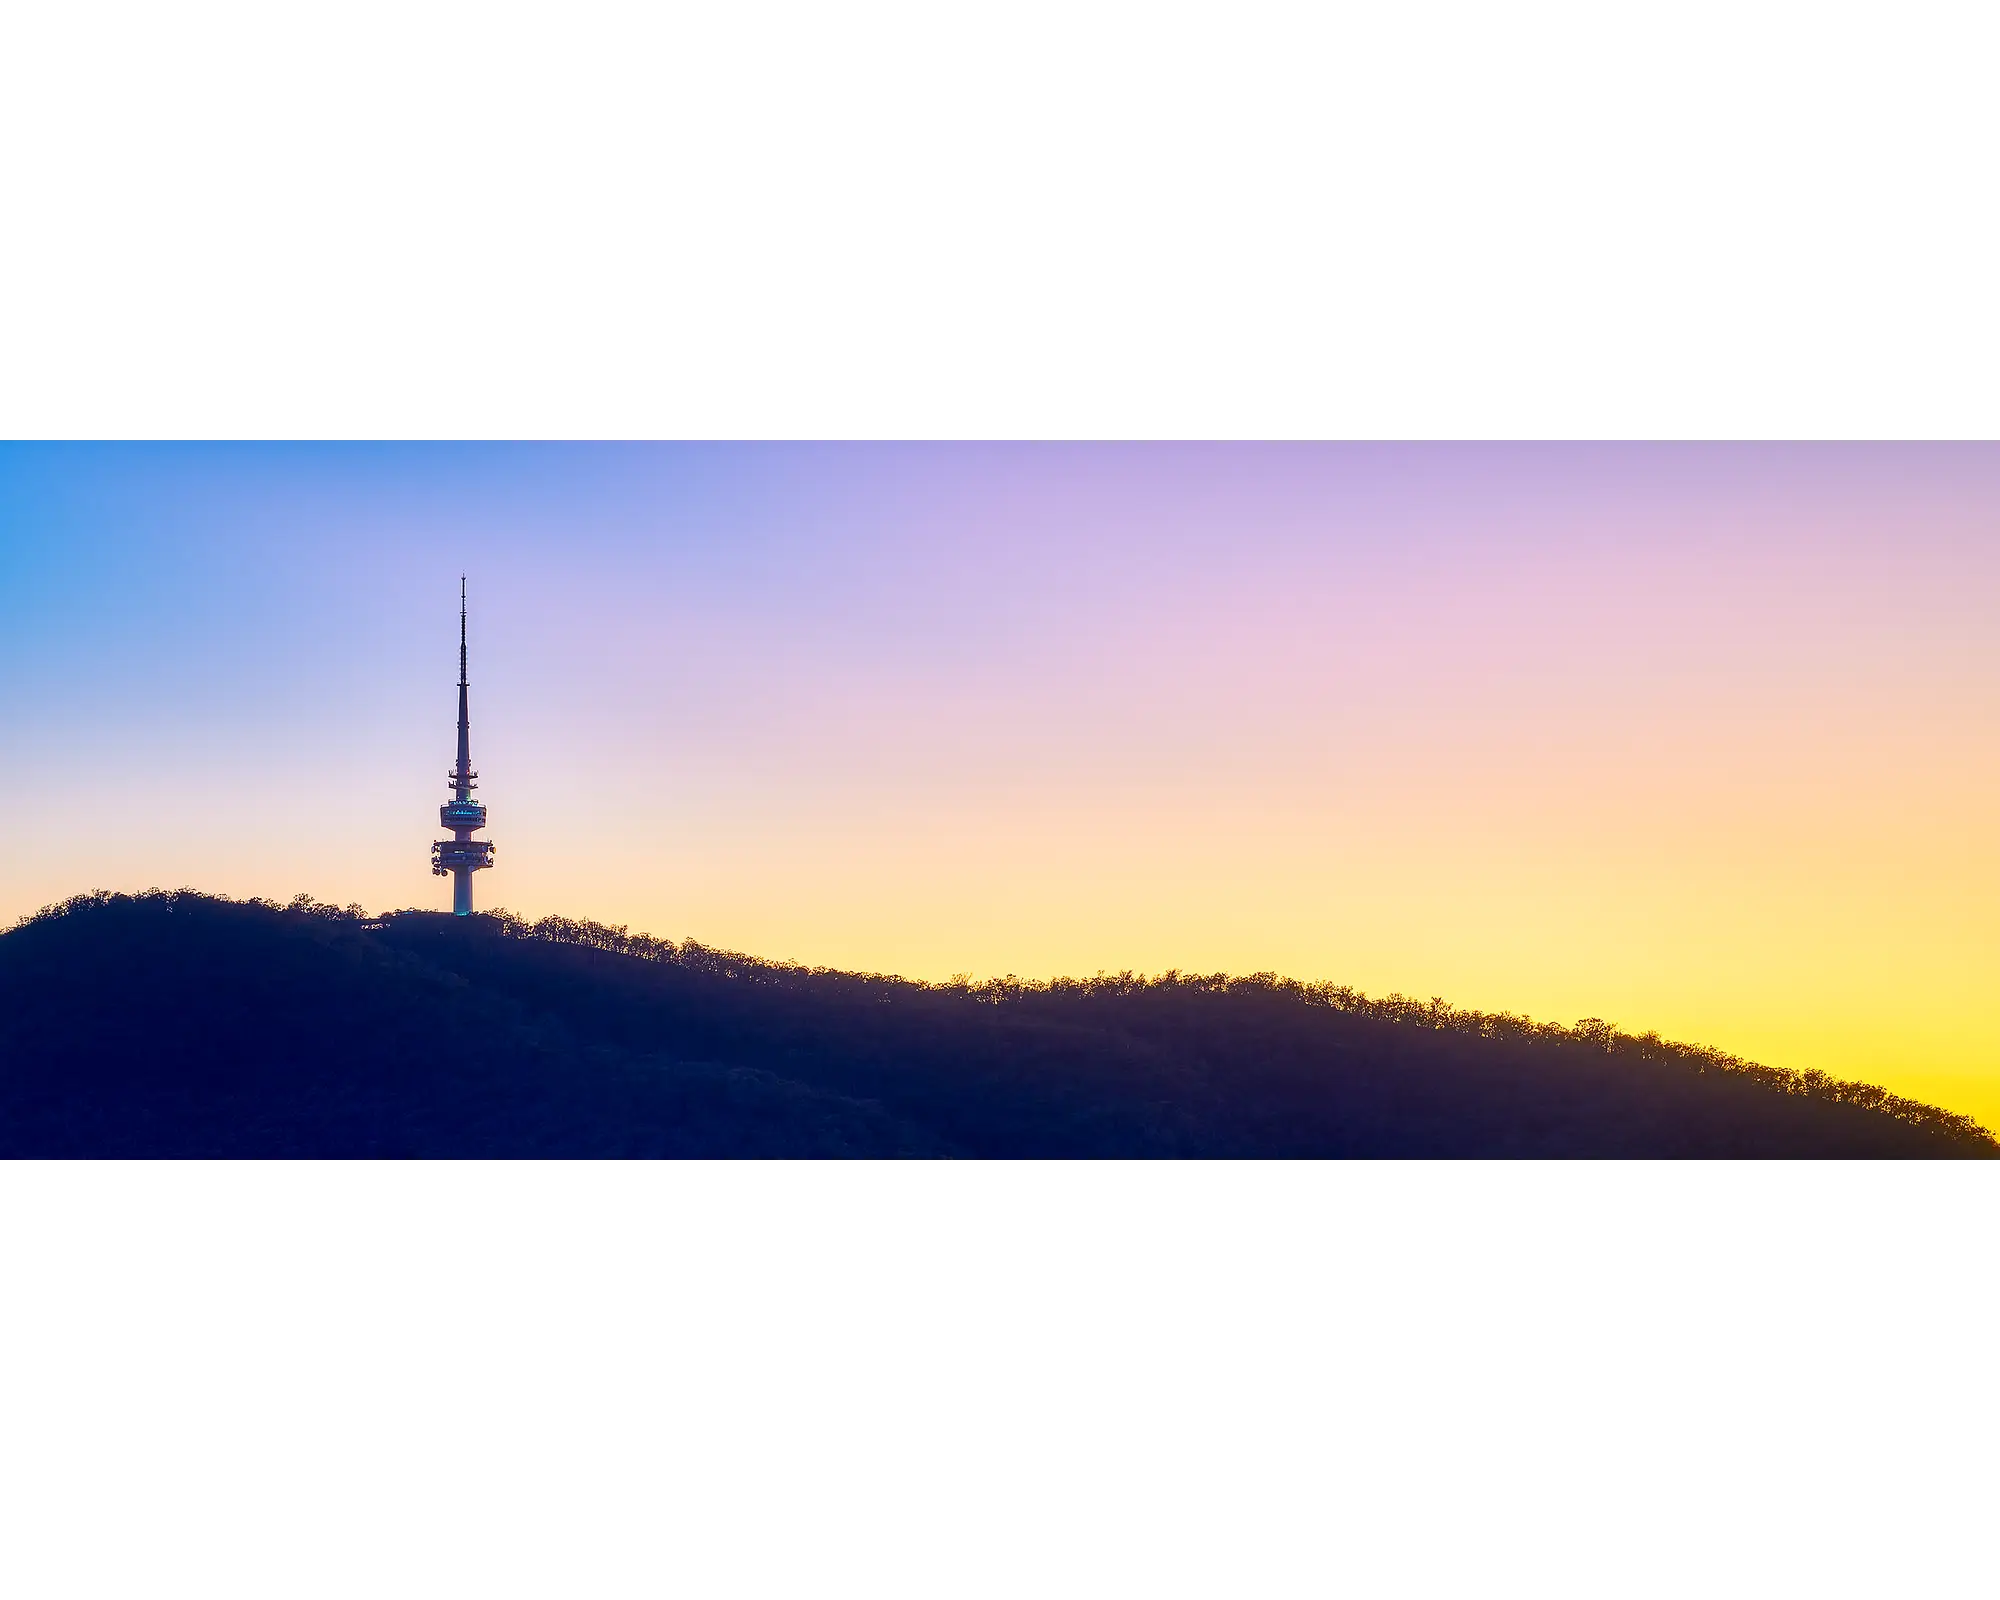 Telstra tower at sunrise, Black Mountain, Canberra.